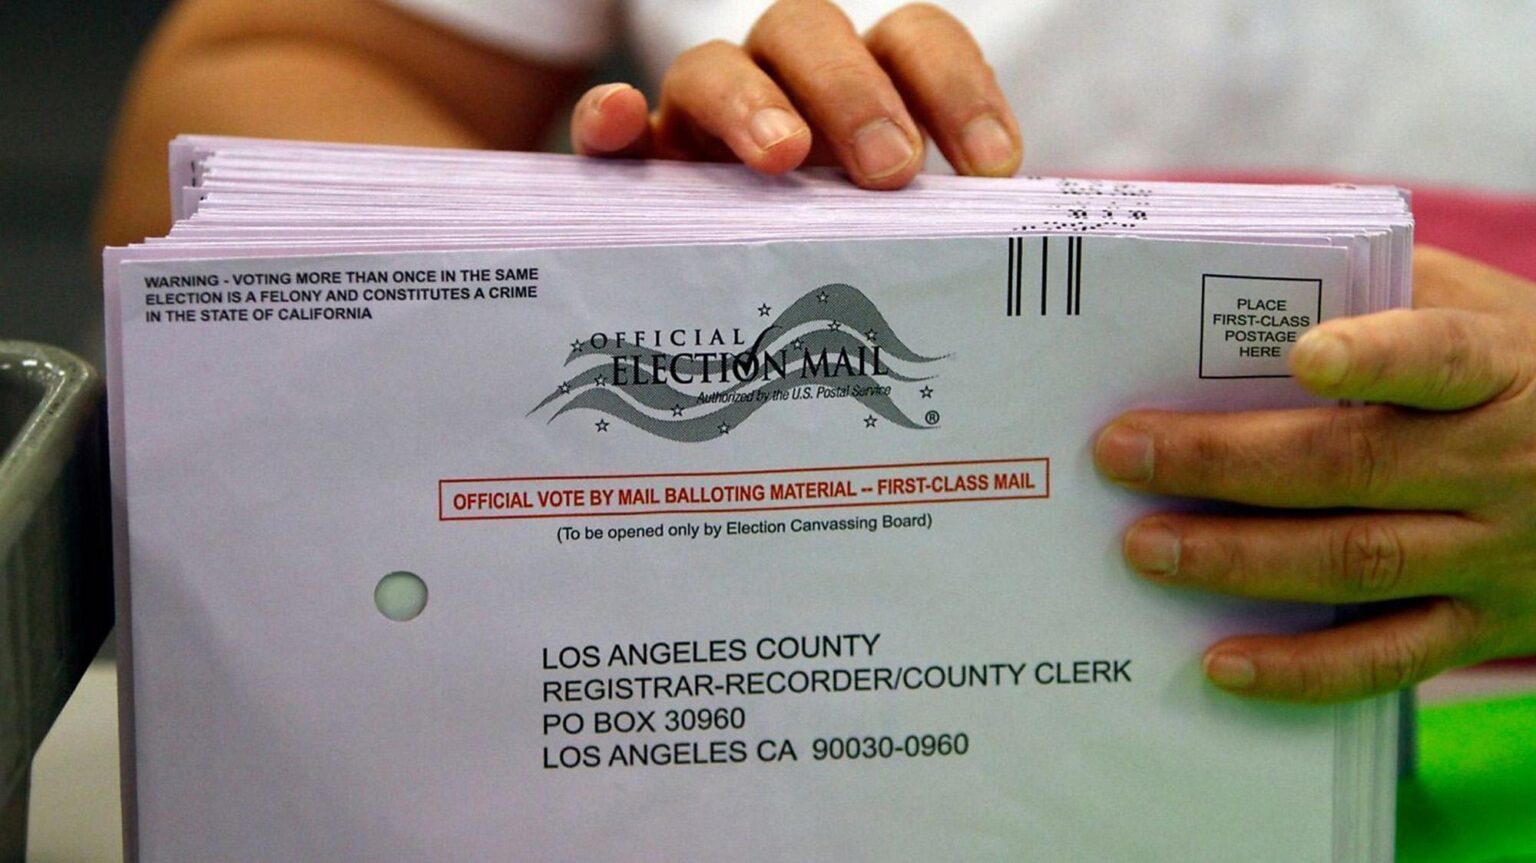 Milions of citizens voted by mail in the California election. Here's how mail-in ballots are letting dead people vote.